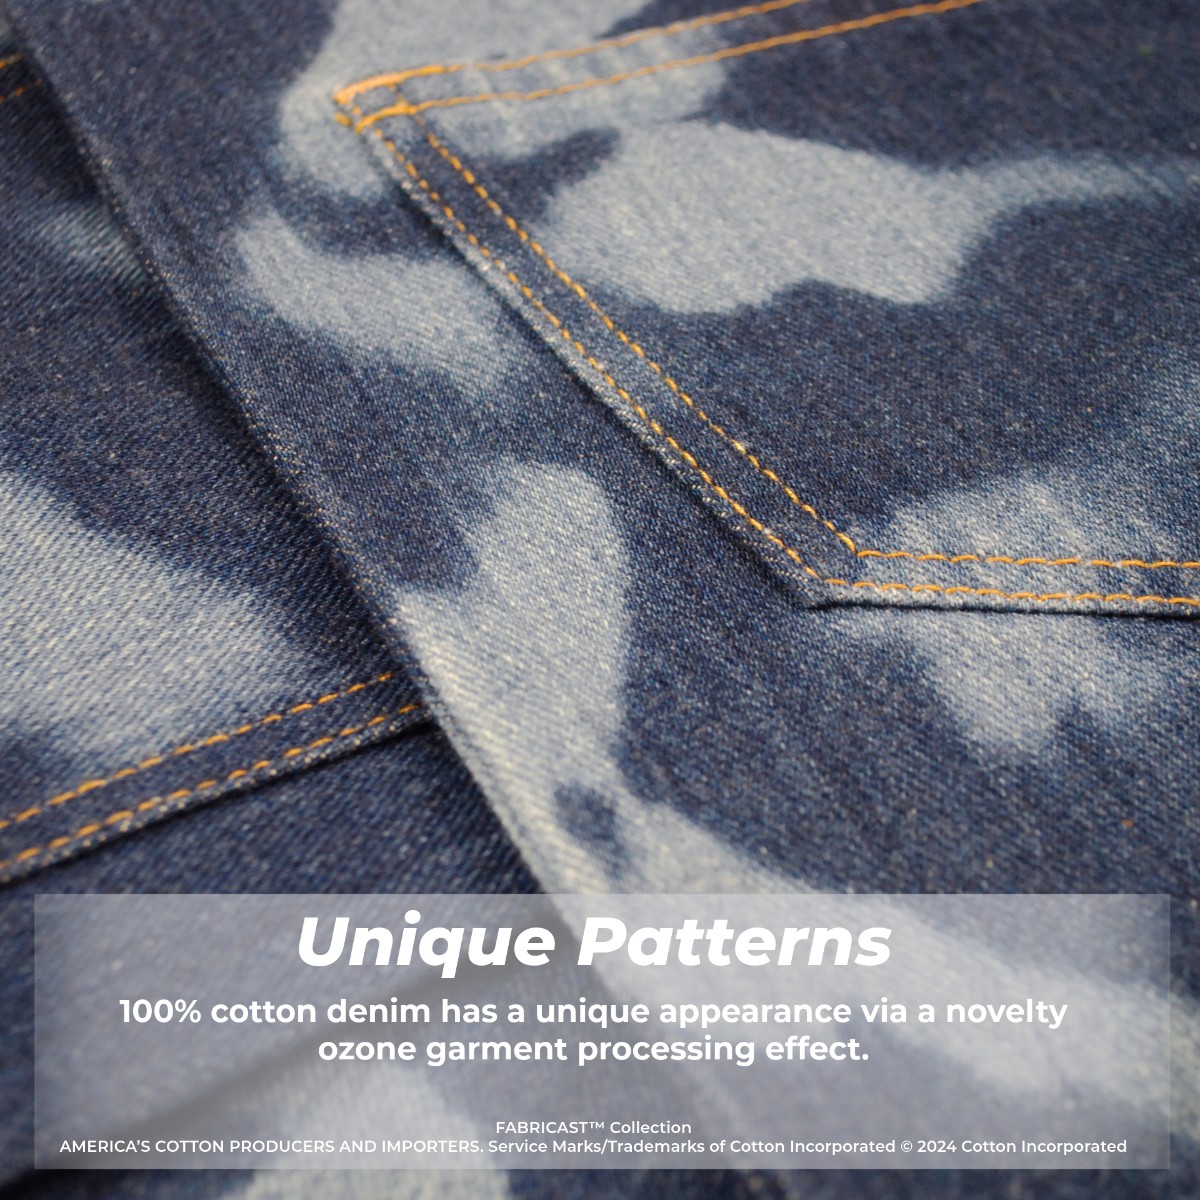 This 100% #cotton #denim has a unique appearance via a novelty ozone garment processing effect. The combination of water & ozone resulted in color removal in a subtle irregular spotty pattern. #FabricFriday @cotton_works brnw.ch/21wJEAc